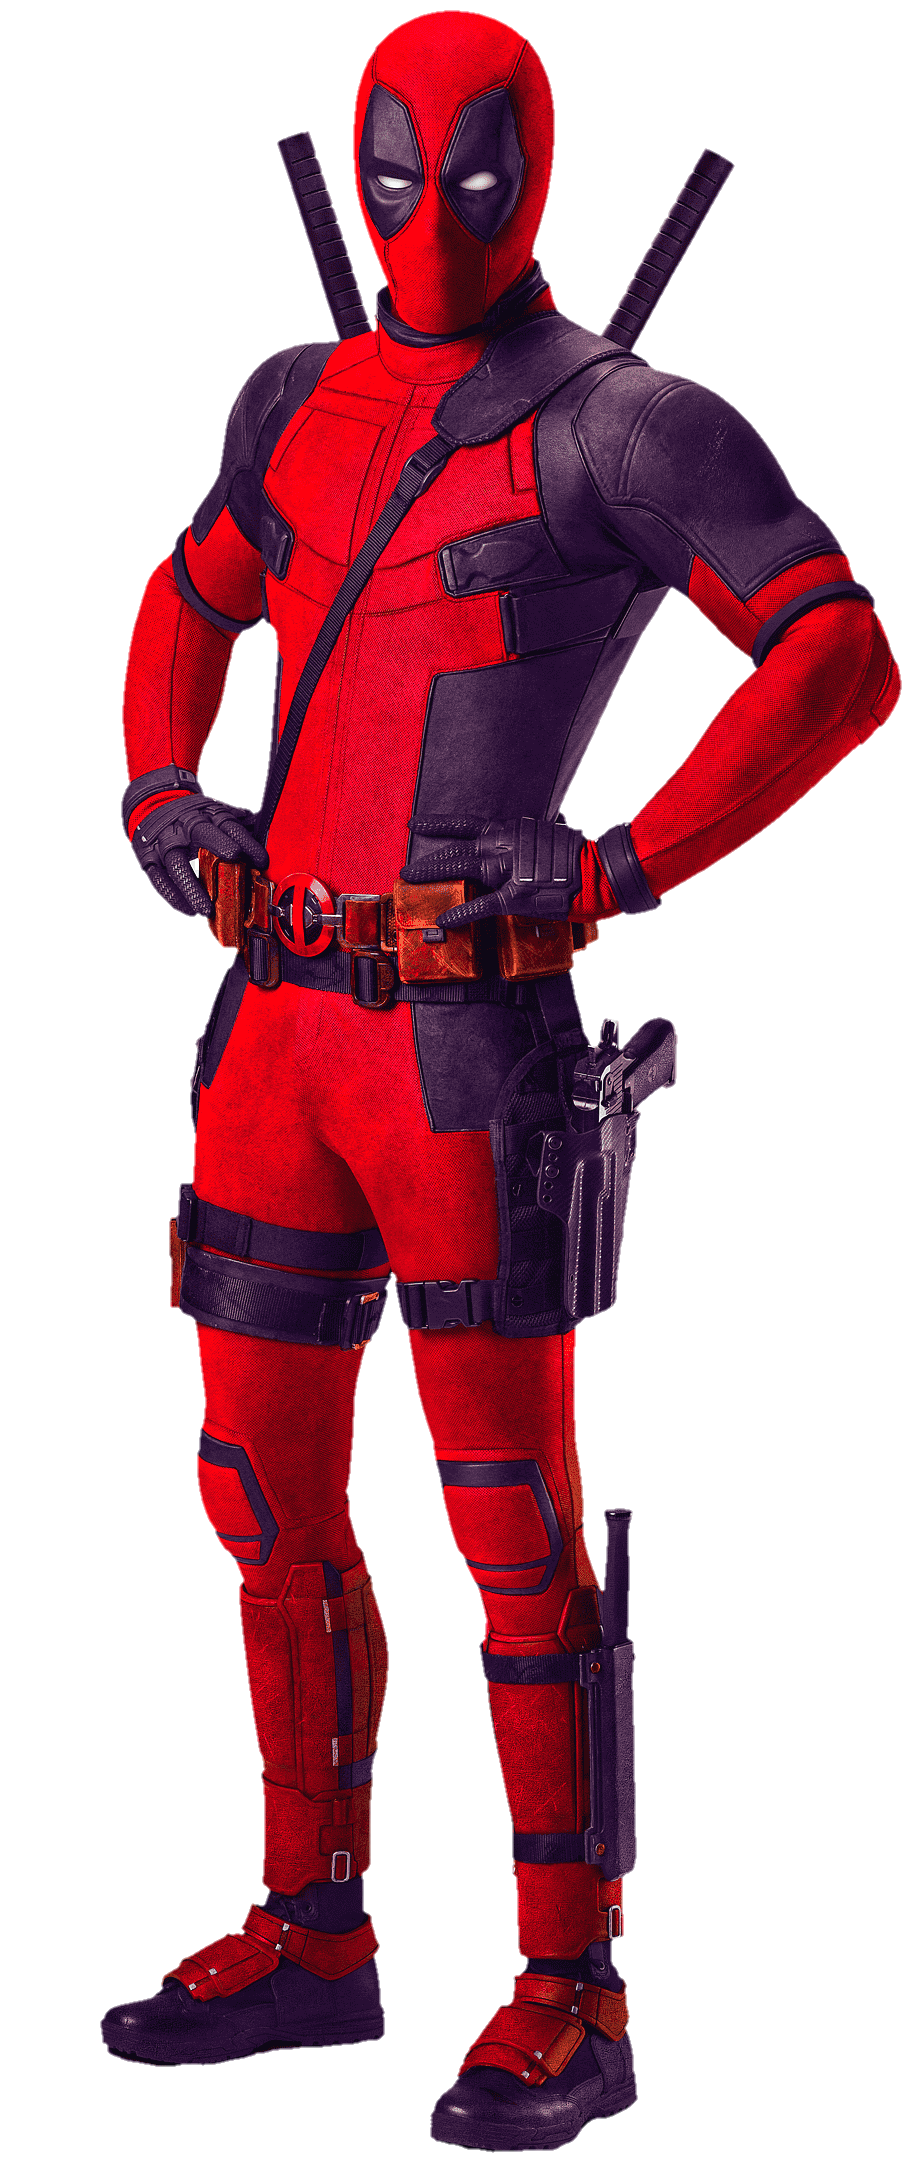 deadpool-png-image-from-pngfre-5